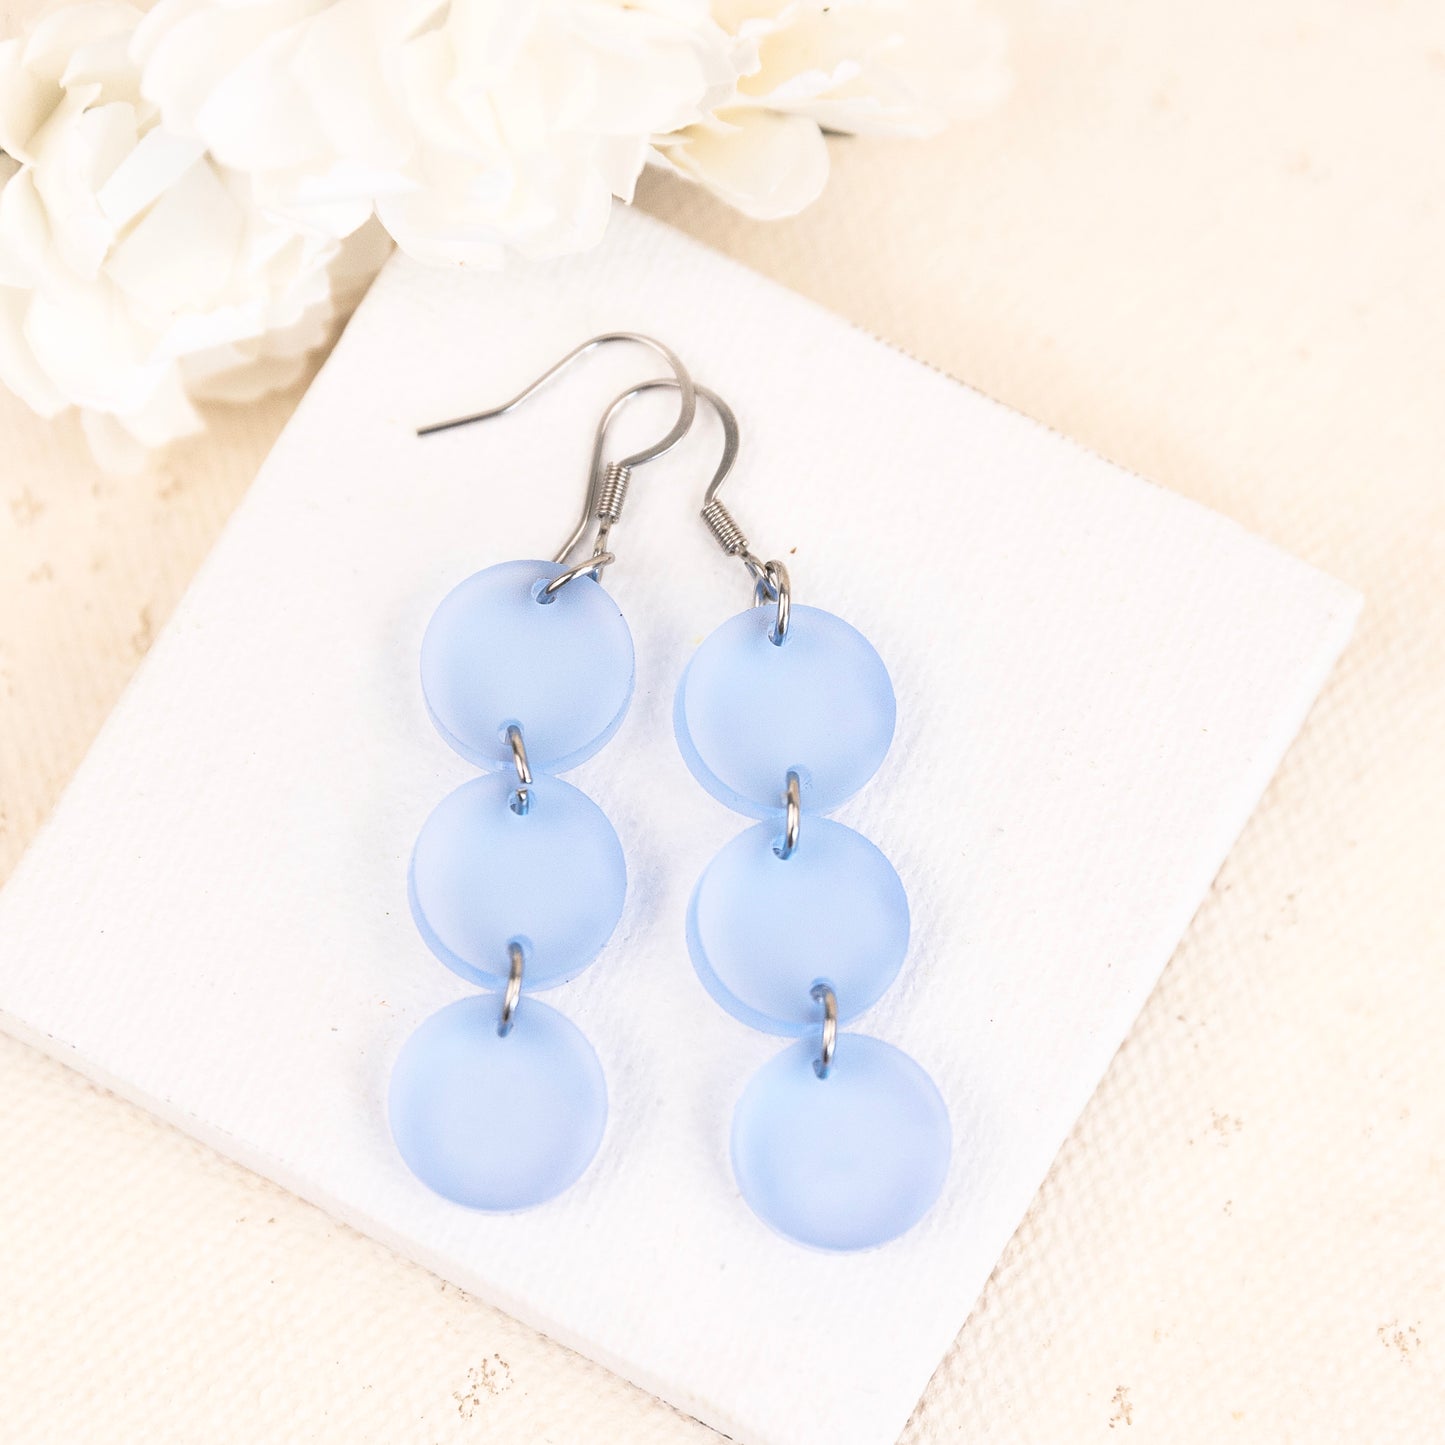 THE DOTTY TRIO in Sheer Ice Blue/ Lightweight Acrylic Statement Earrings